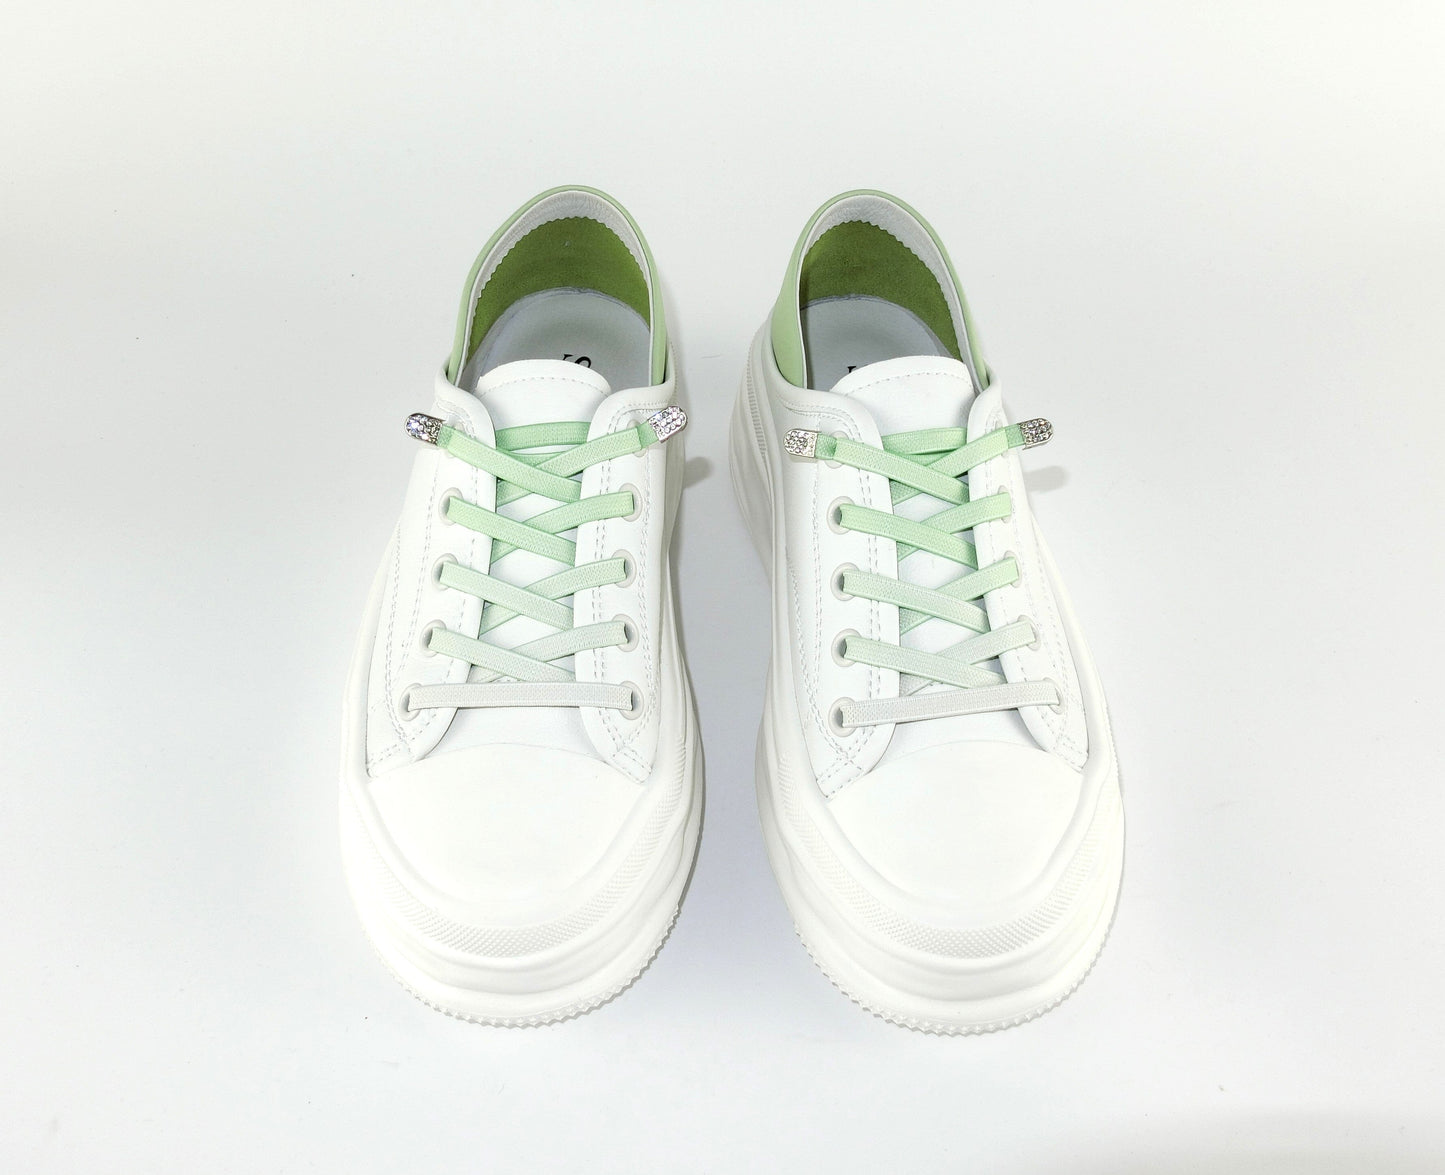 SS23003 Genuine leather white sneakers with cushions- Mint and Pale blue sneakers Sam Star Shoes White Mint 36/3 